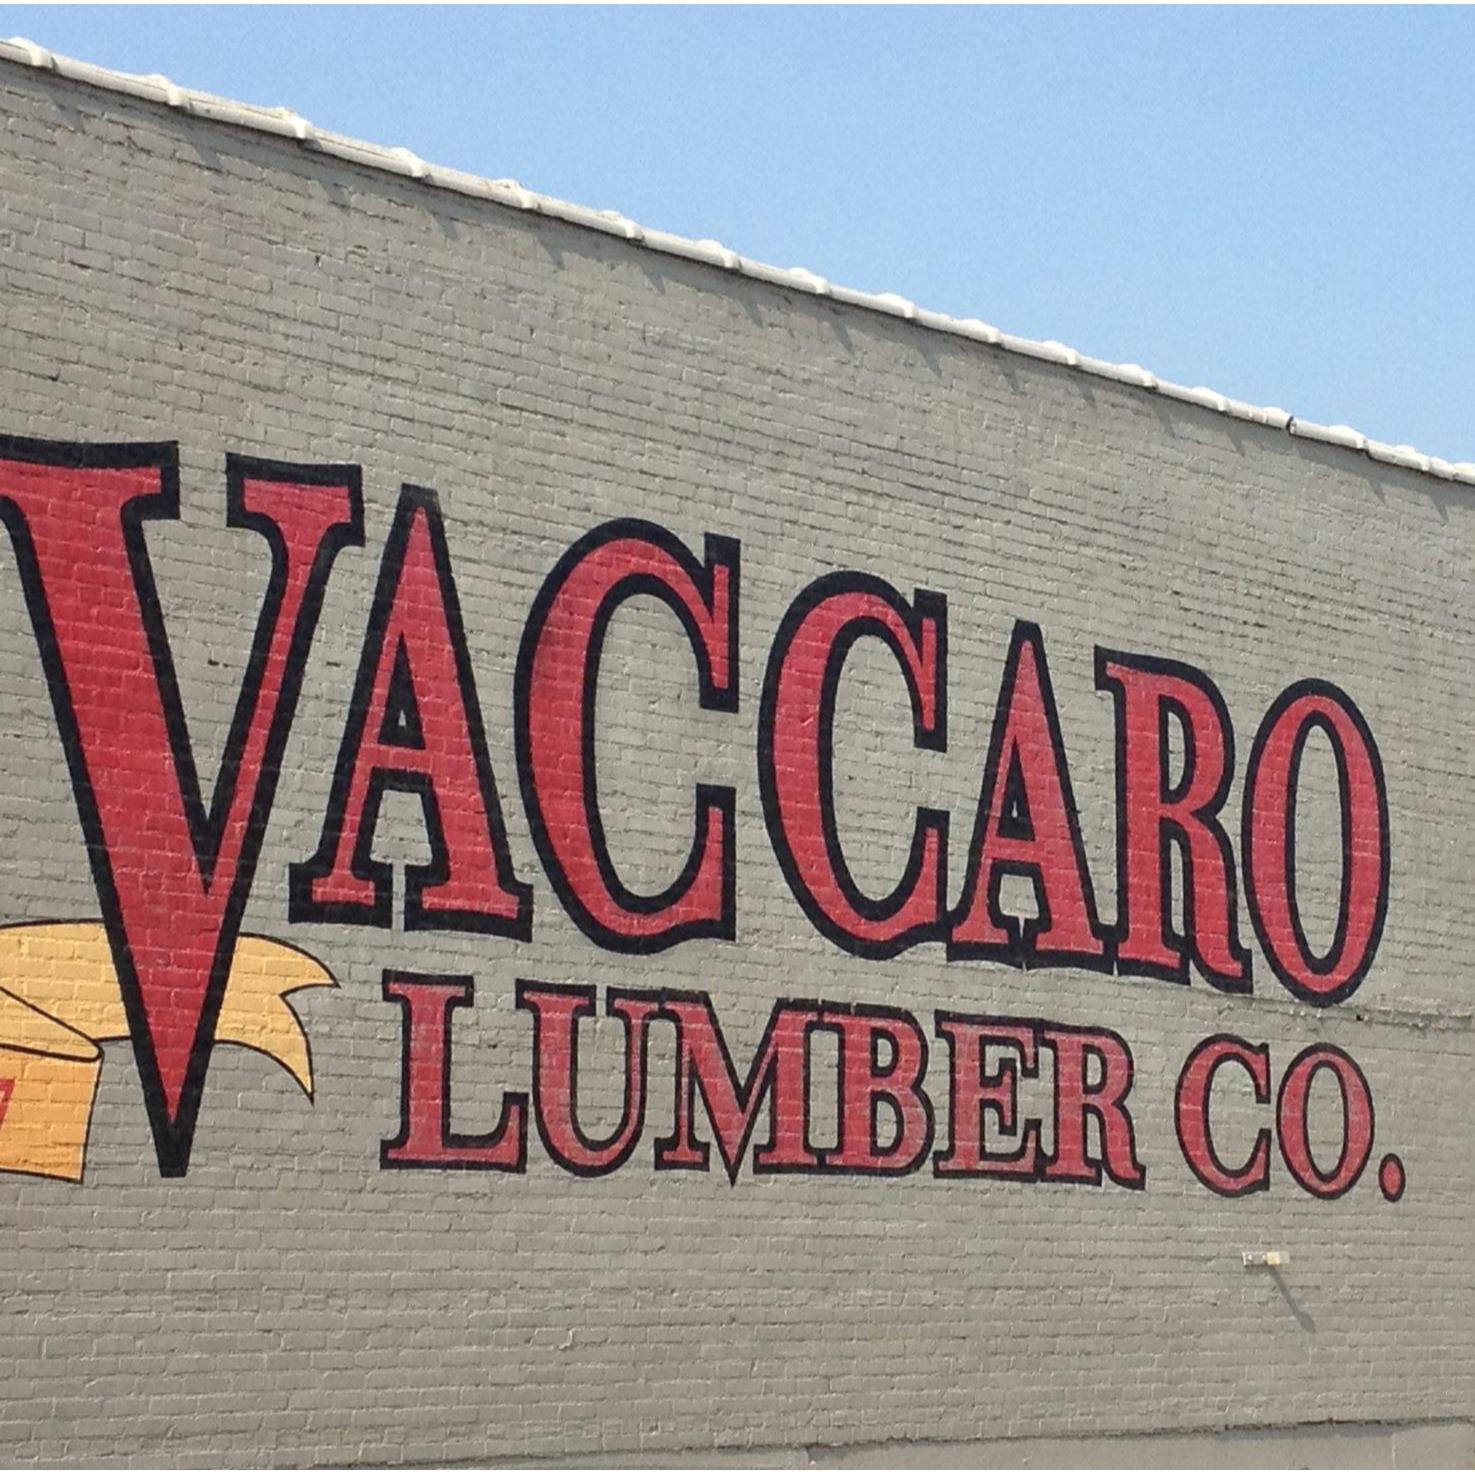 Vaccaro Lumber & Hardware Co - Forrest City, AR 72335 - (870)633-1141 | ShowMeLocal.com